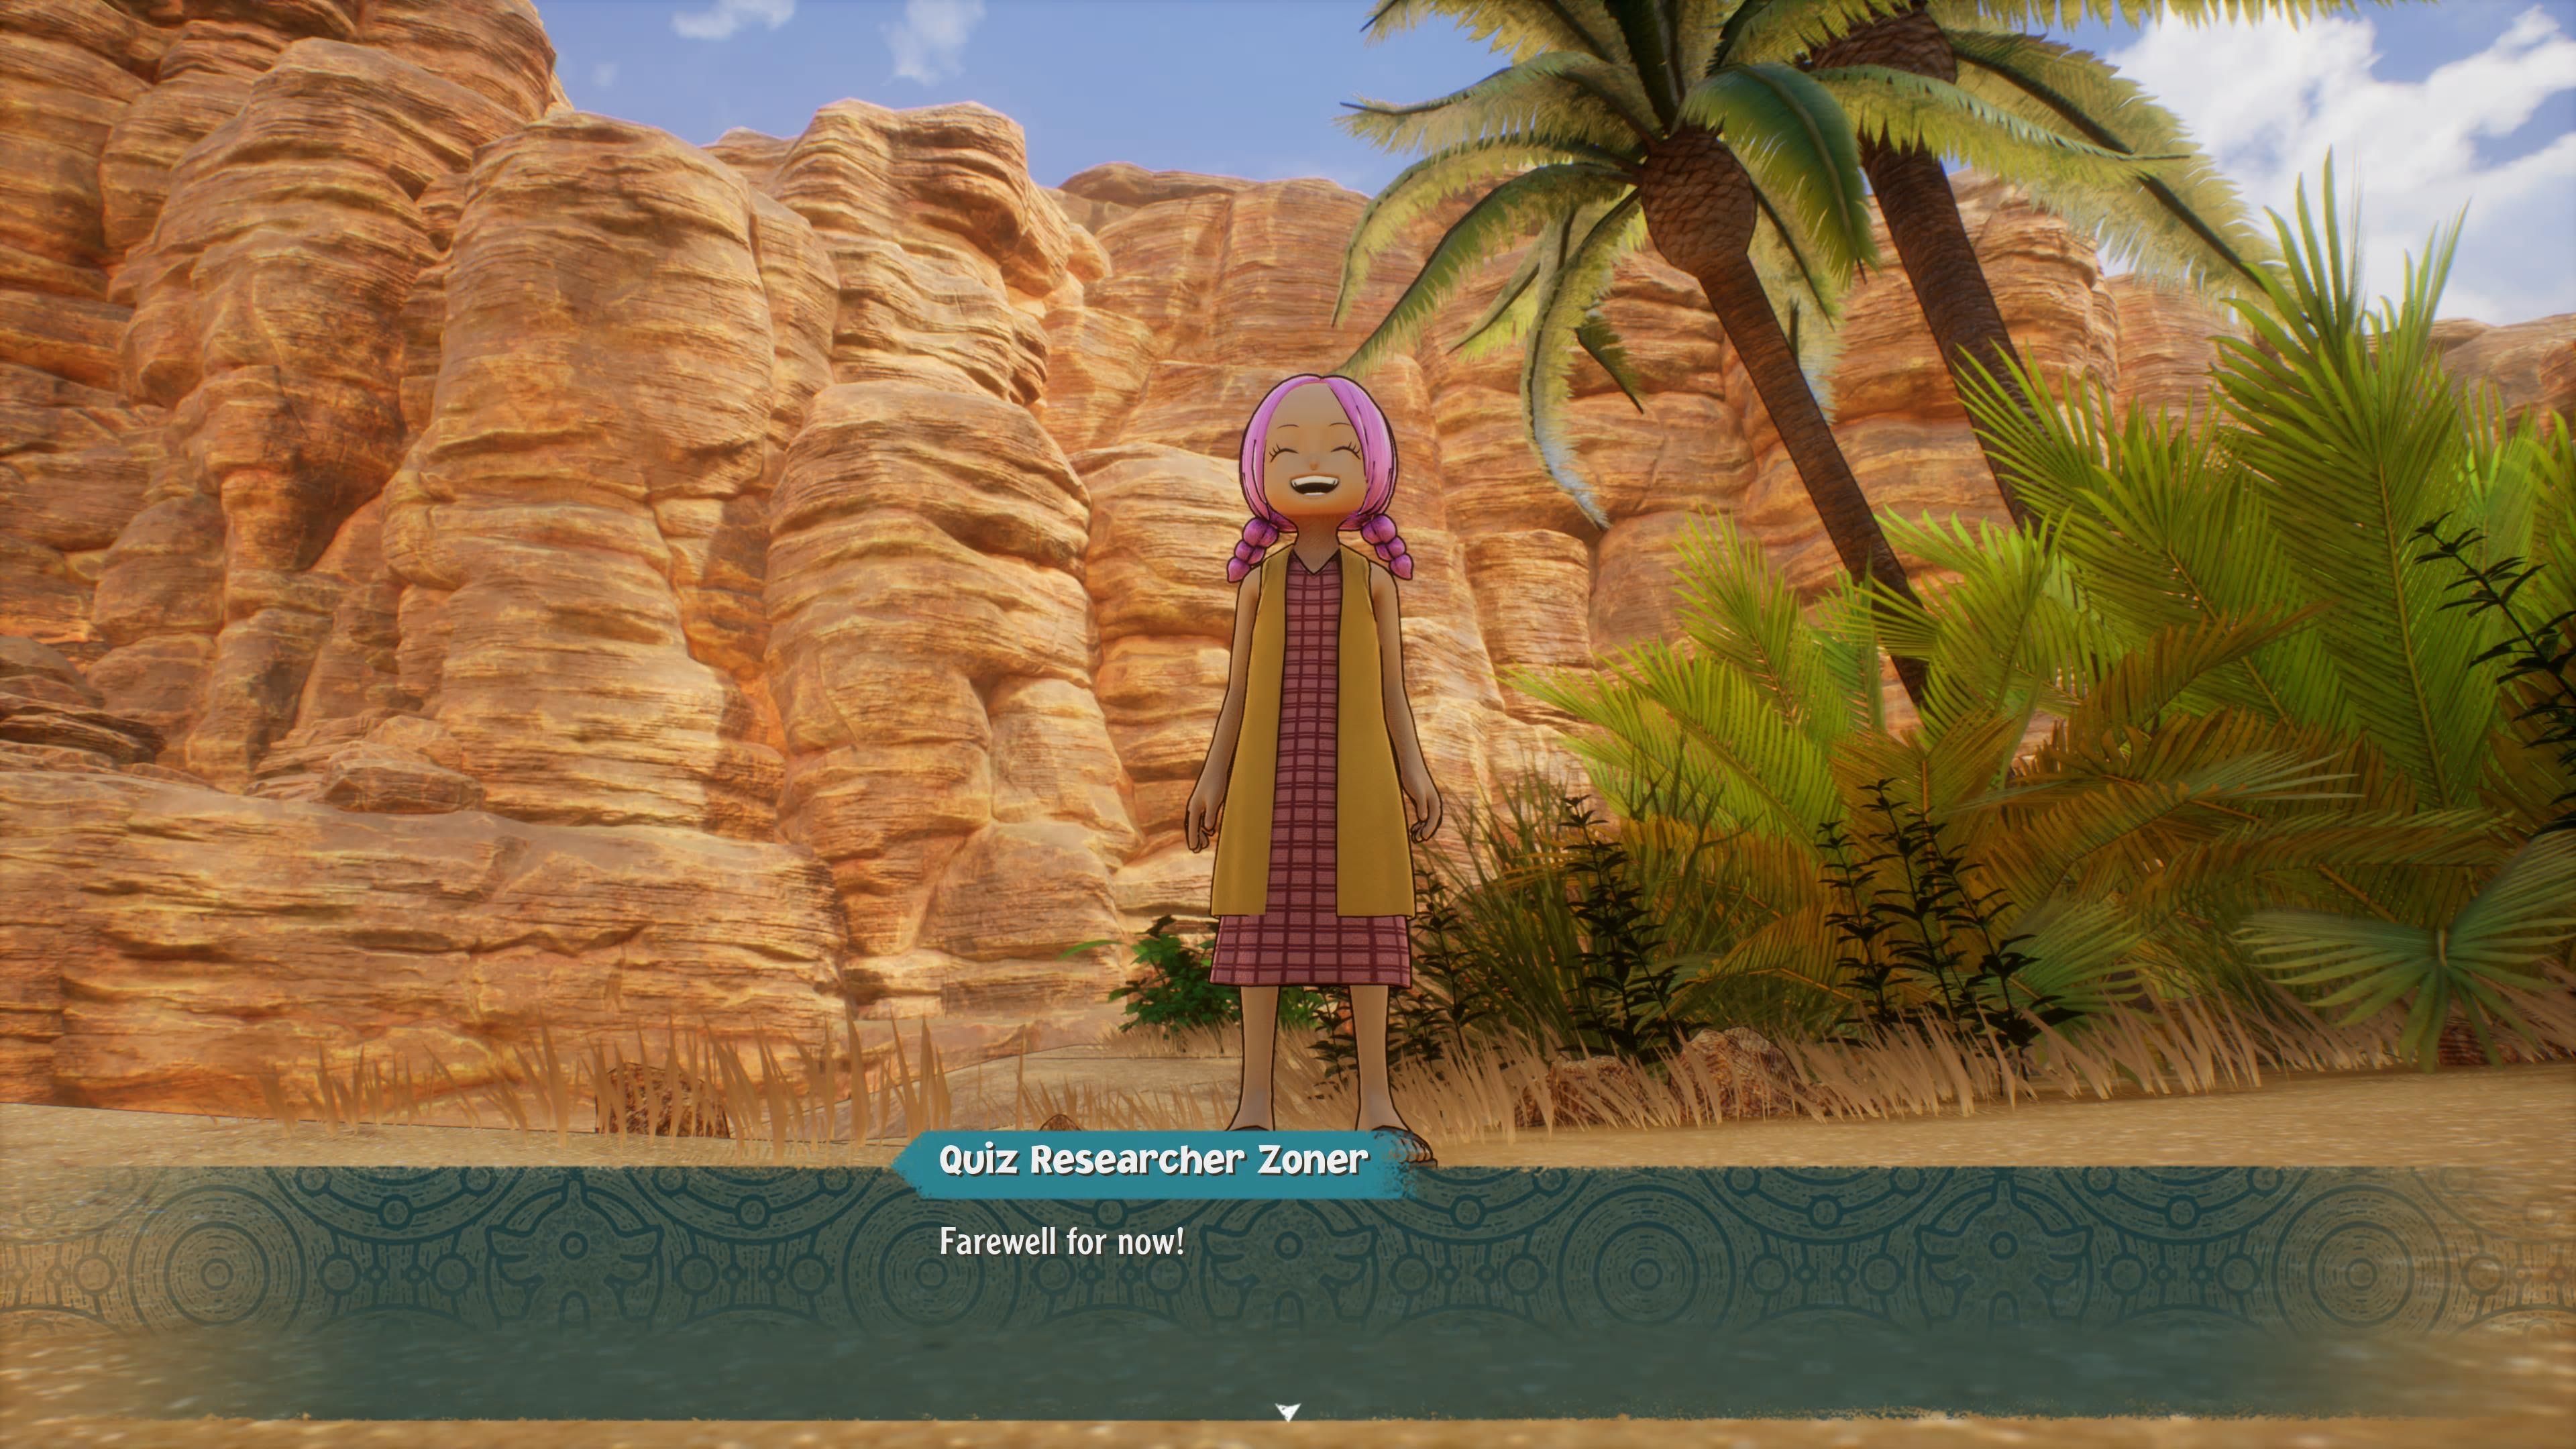 One Piece Odyssey Zoner quest giver, little girl with purple hair